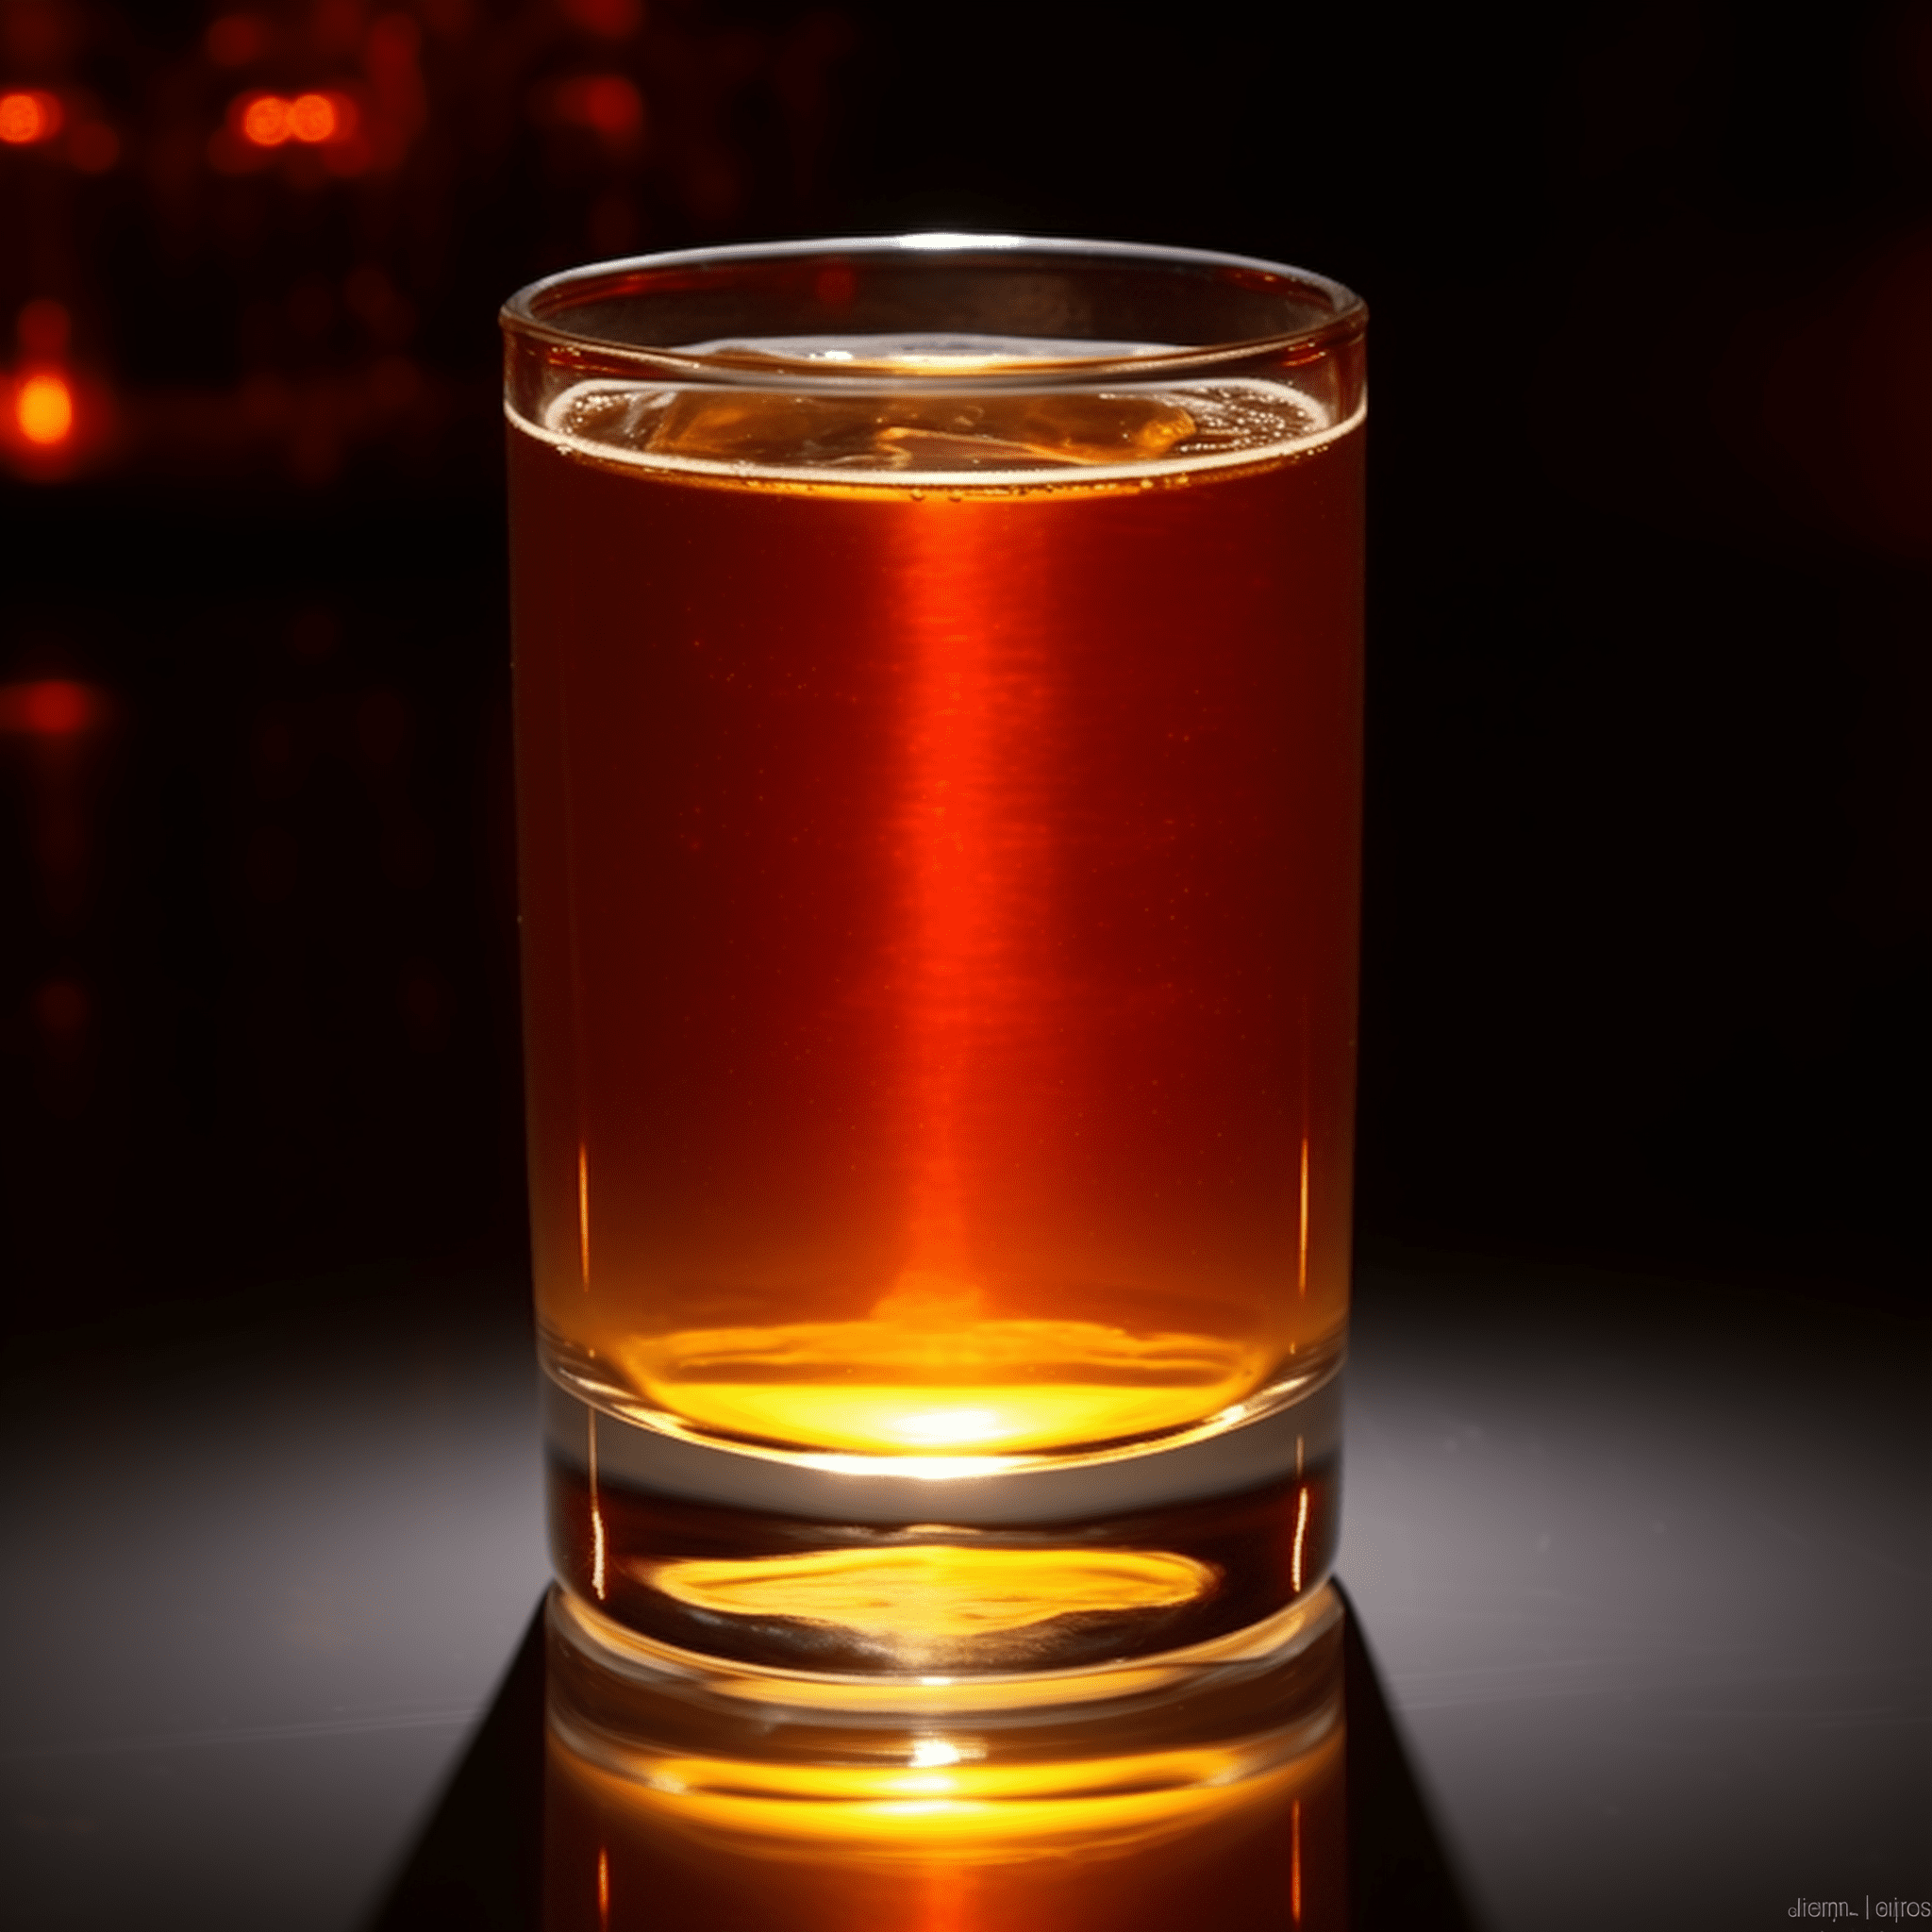 Pitbull on Crack Recipe - This shot is a fiery blend of strong flavors. It's robust, intense, and not for the faint-hearted. The combination of vodka, Jagermeister, Bacardi 151, and Wild Turkey Bourbon creates a complex taste that's predominantly spicy with a hint of sweetness from the lime.